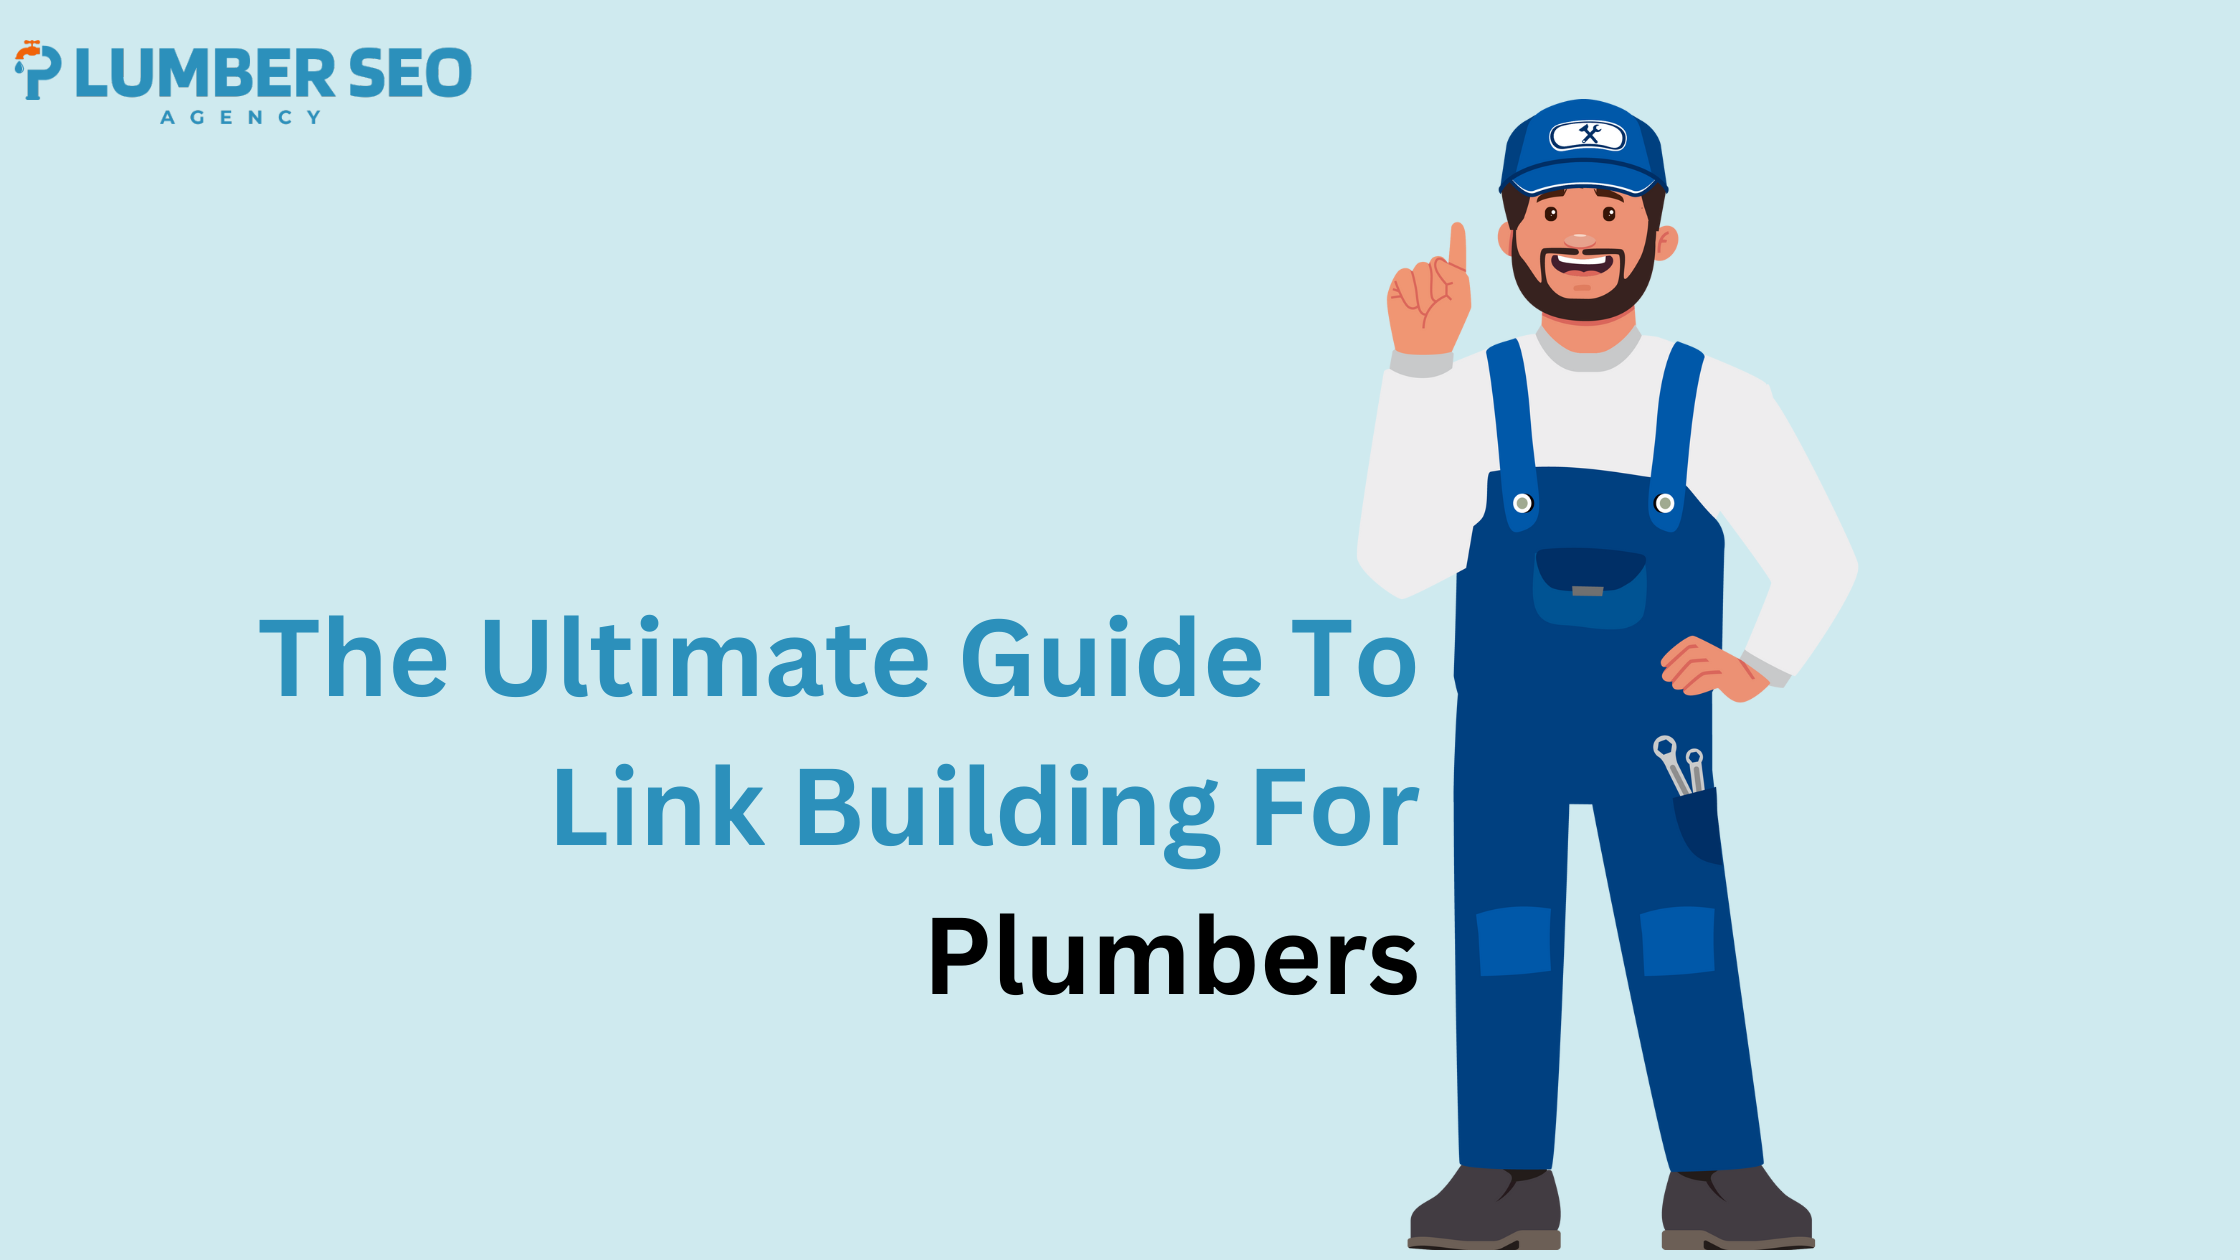 The Ultimate Guide To Link Building For Plumbers: Boost Your Online Presence With Effective Strategies